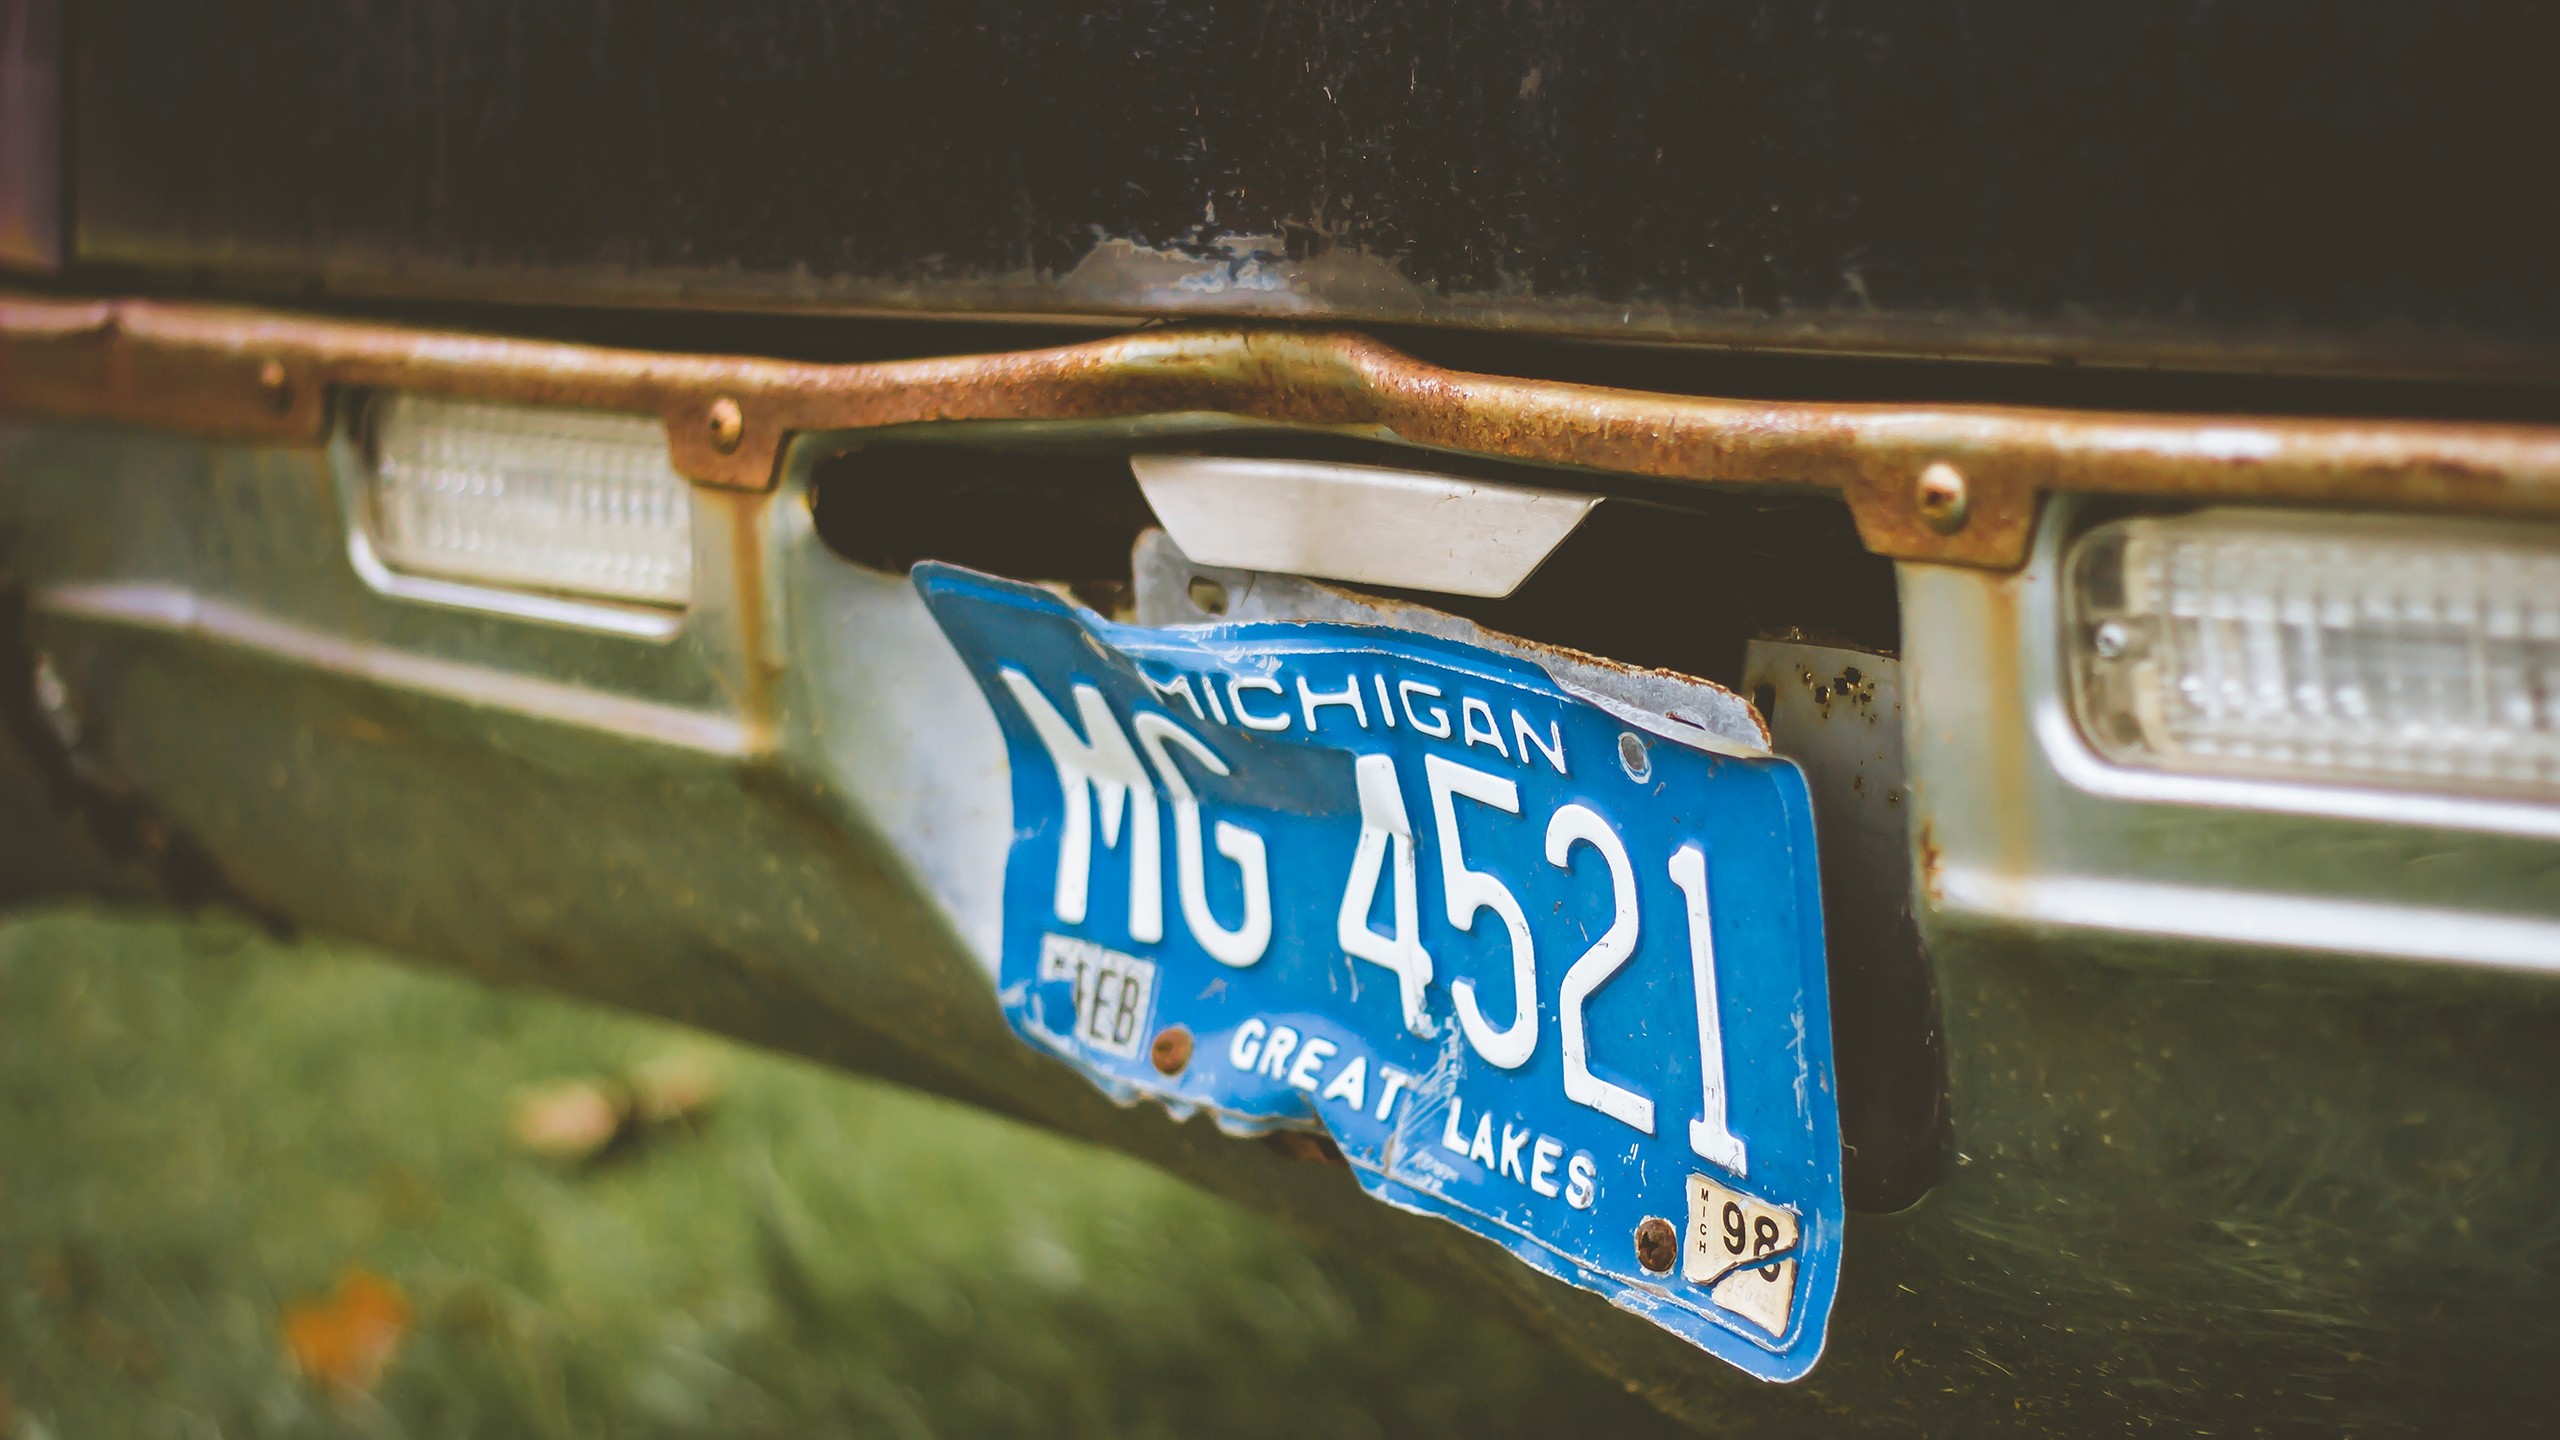 General 2560x1440 Michigan licence plates old car rust